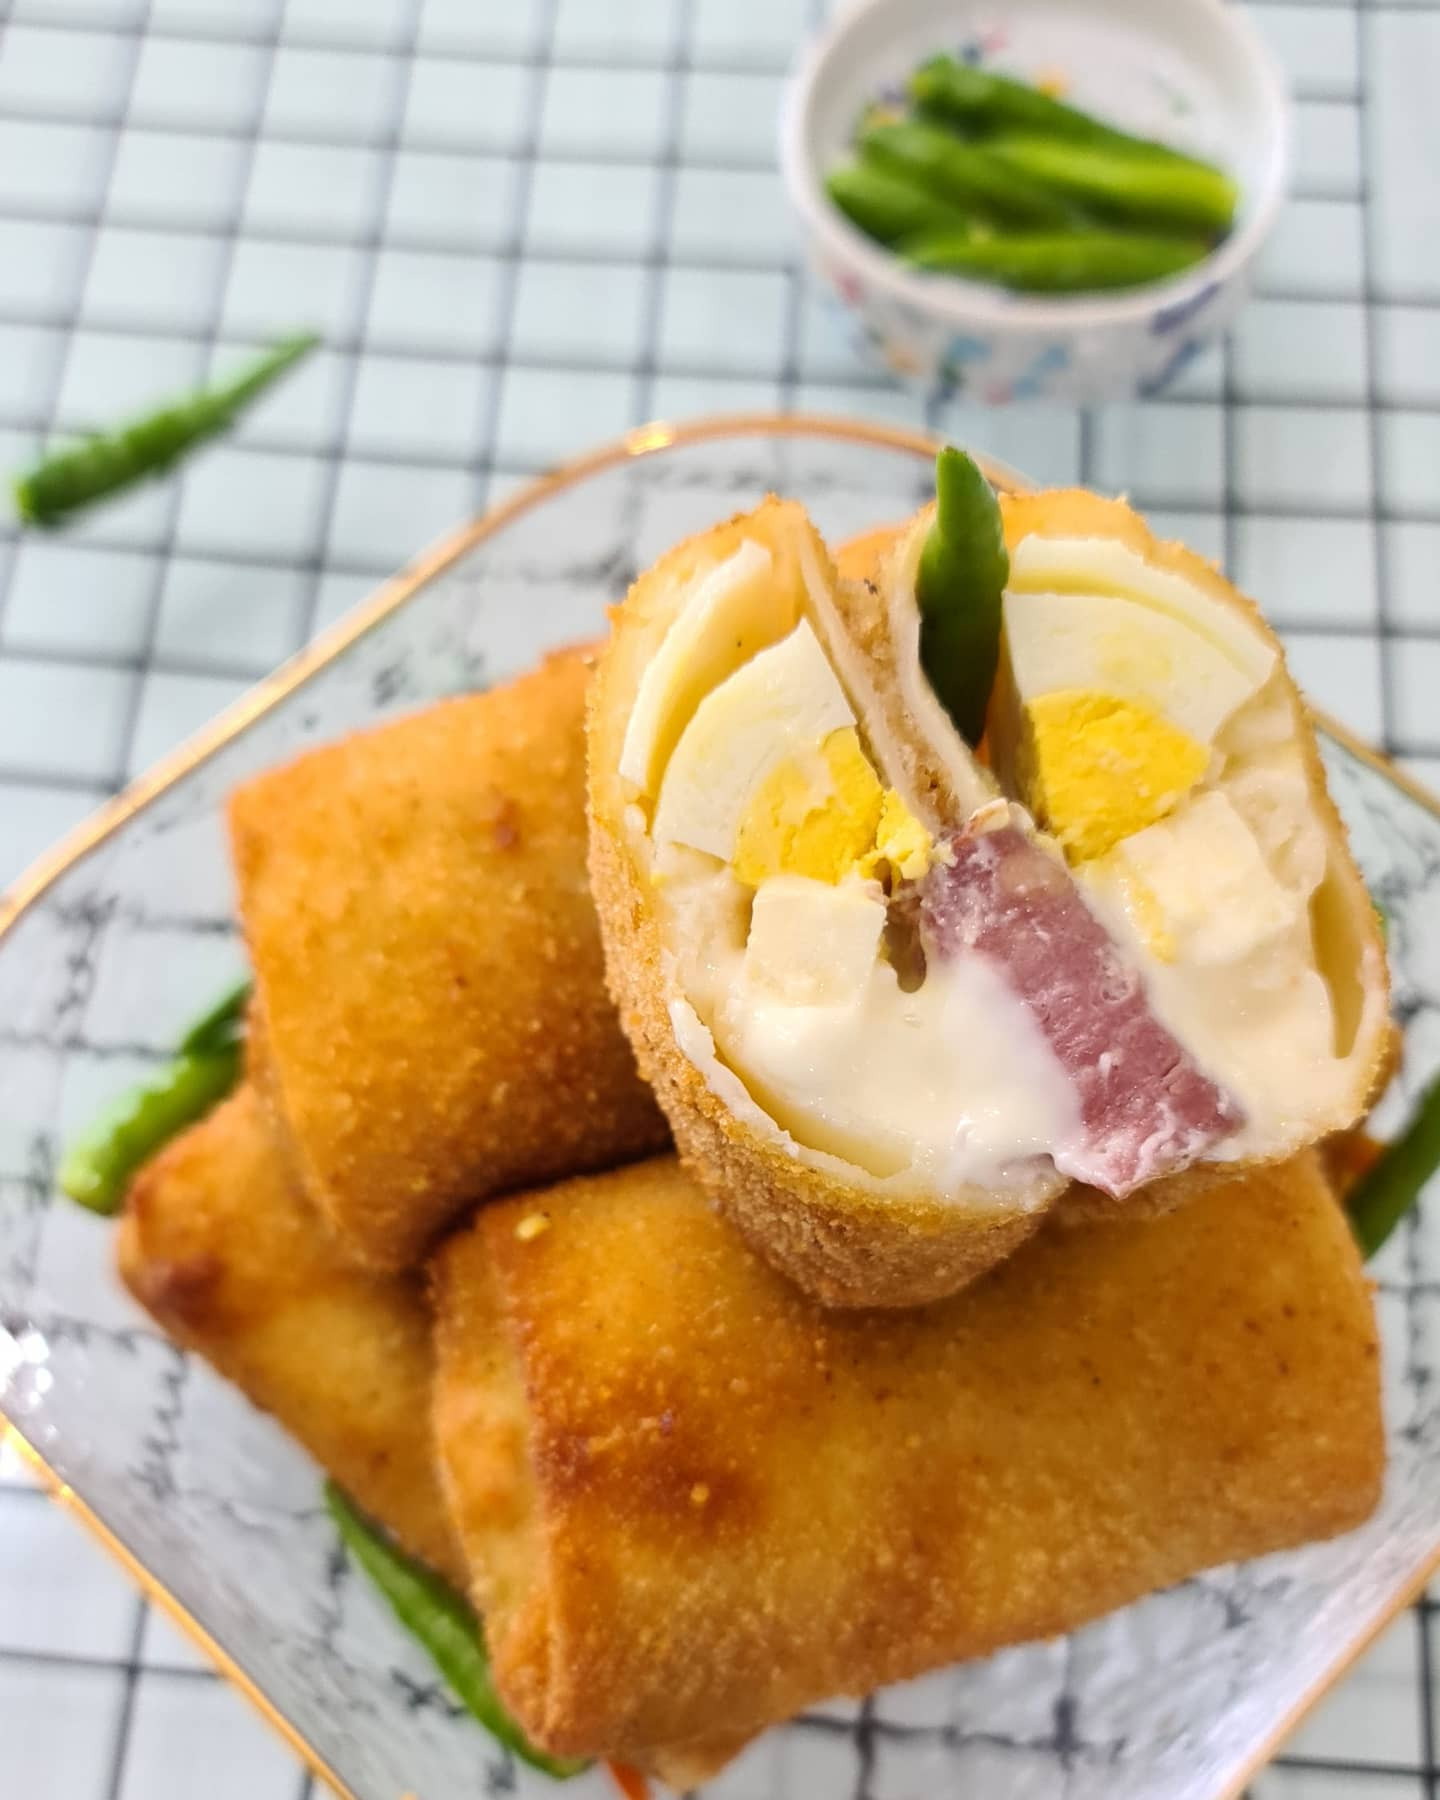 Risoles Beef Mayo